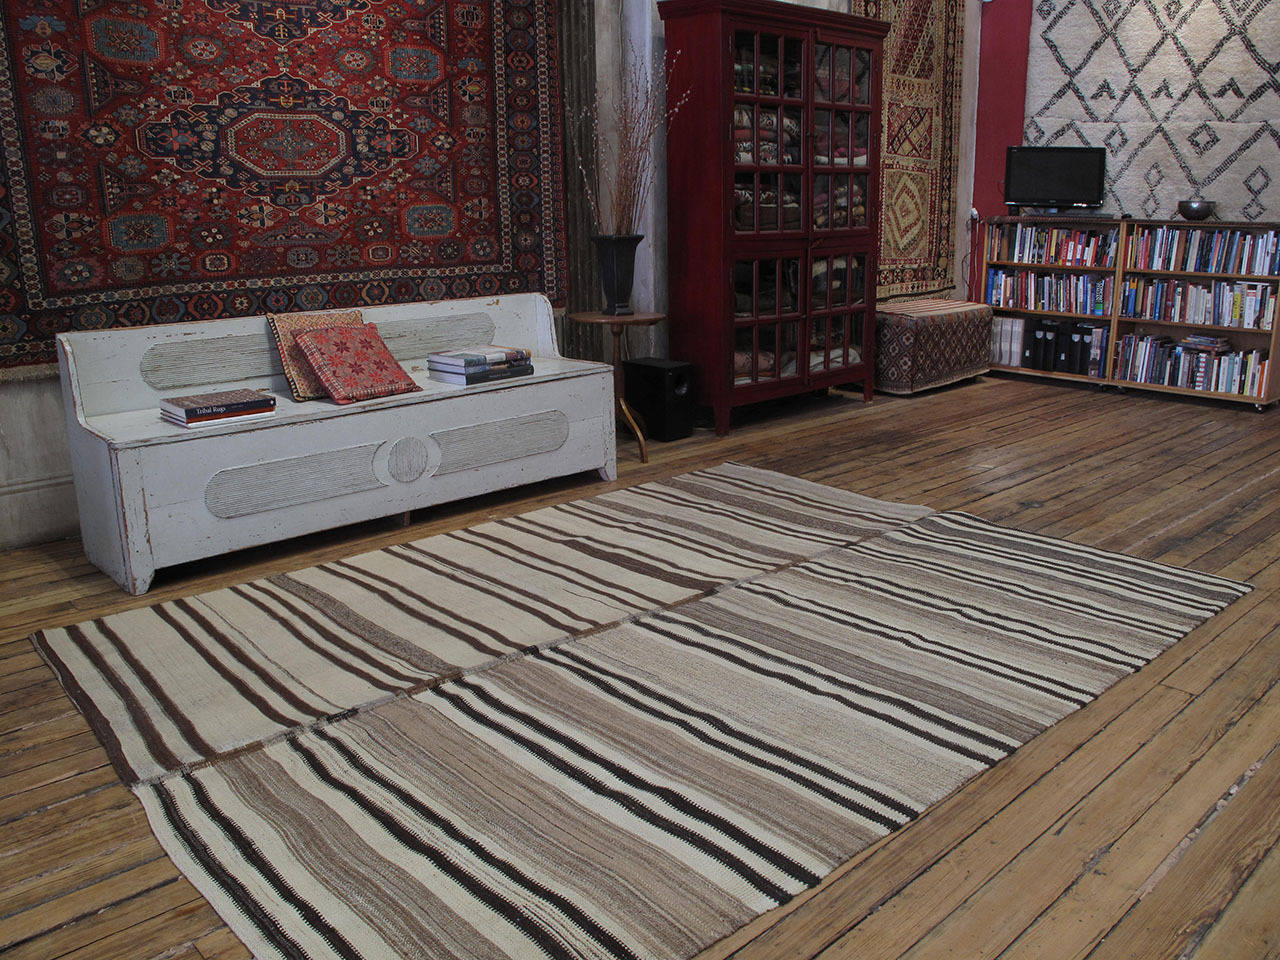 A simple tribal floor cover, woven in two, not-quite-identical panels, using only wool in natural, un-dyed tones. Very sturdy and in larger-than-usual proportions, this is a very high quality example with great modern/minimalist appeal.